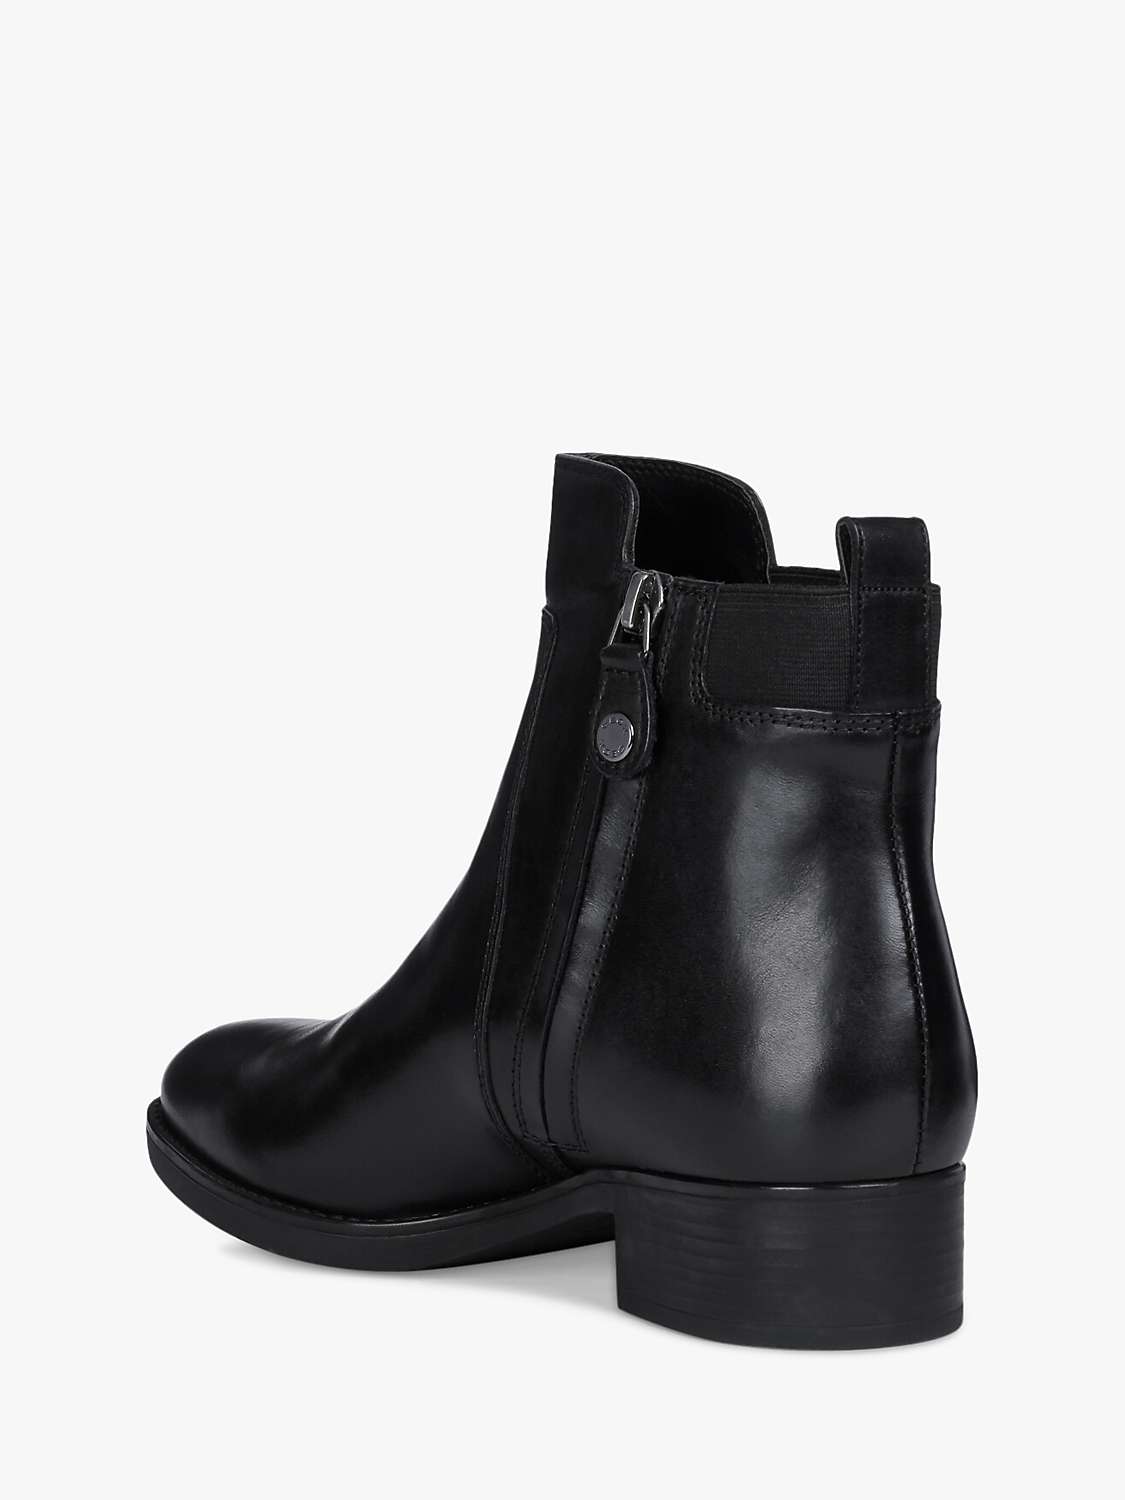 Geox Women's Felicity Leather Heeled Ankle Boots, Black at John Lewis ...